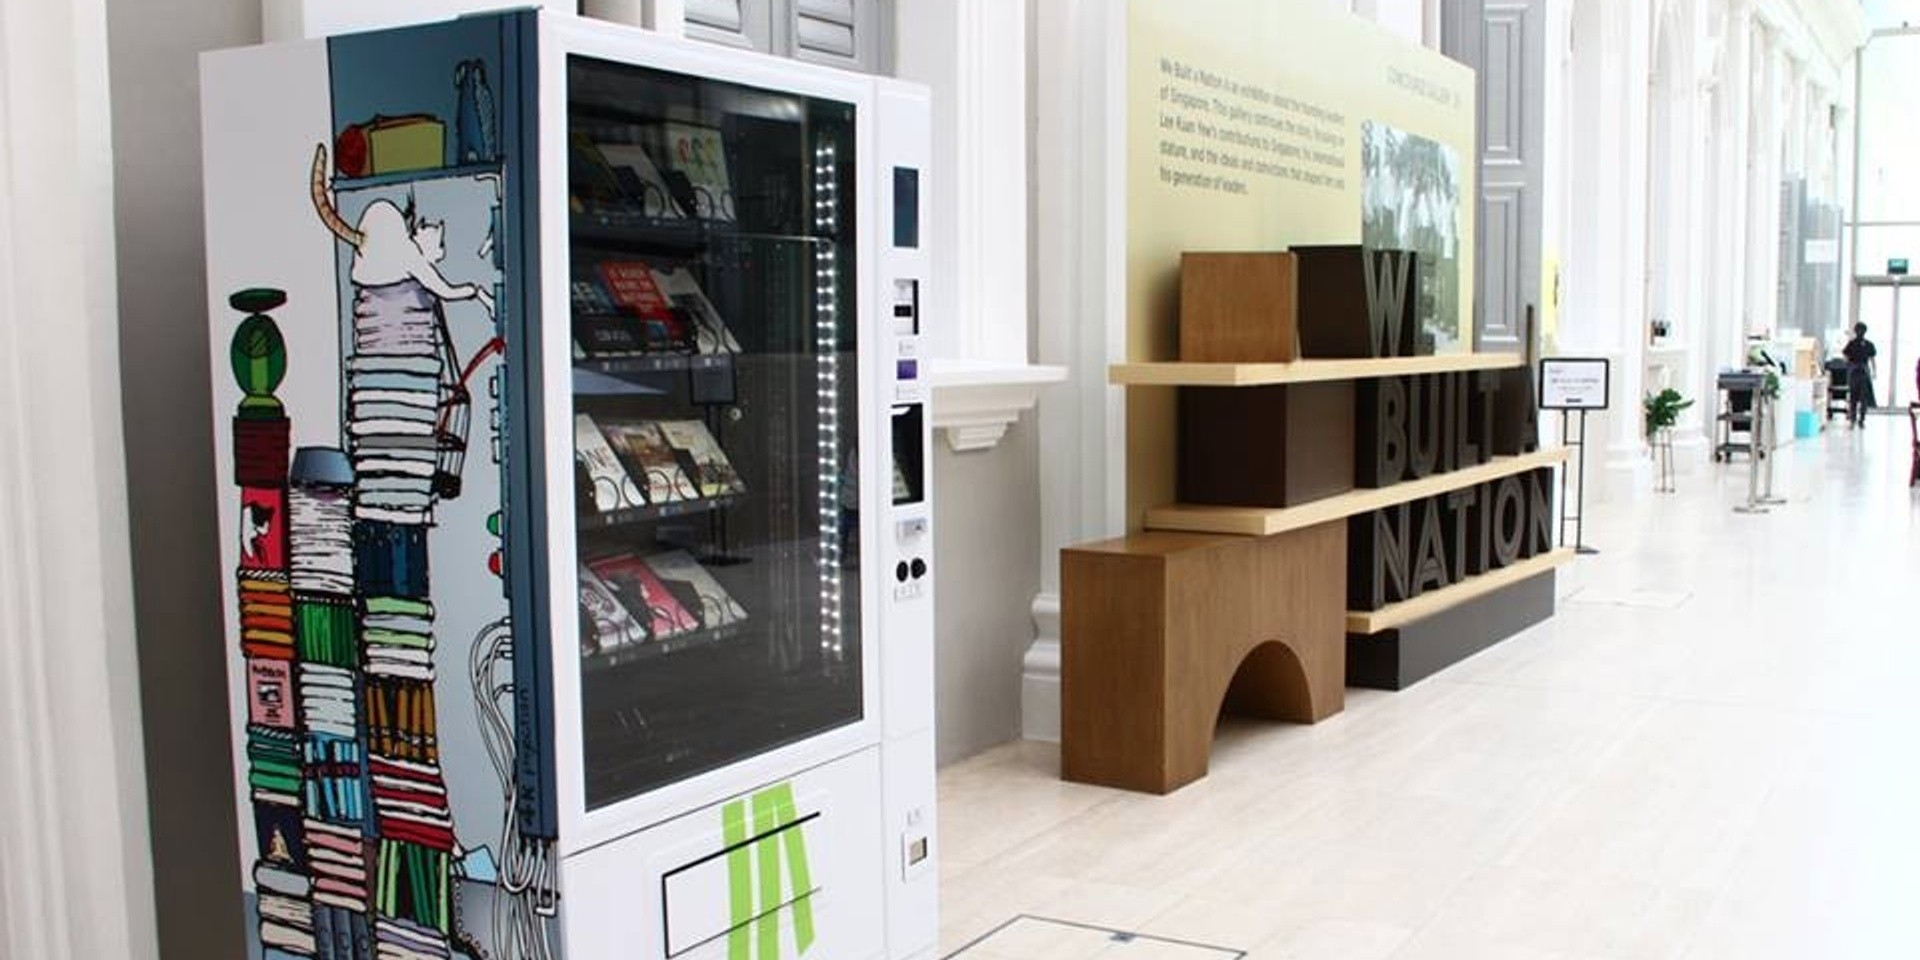 There’s a book vending machine in Singapore — here’s what else we’d like to see